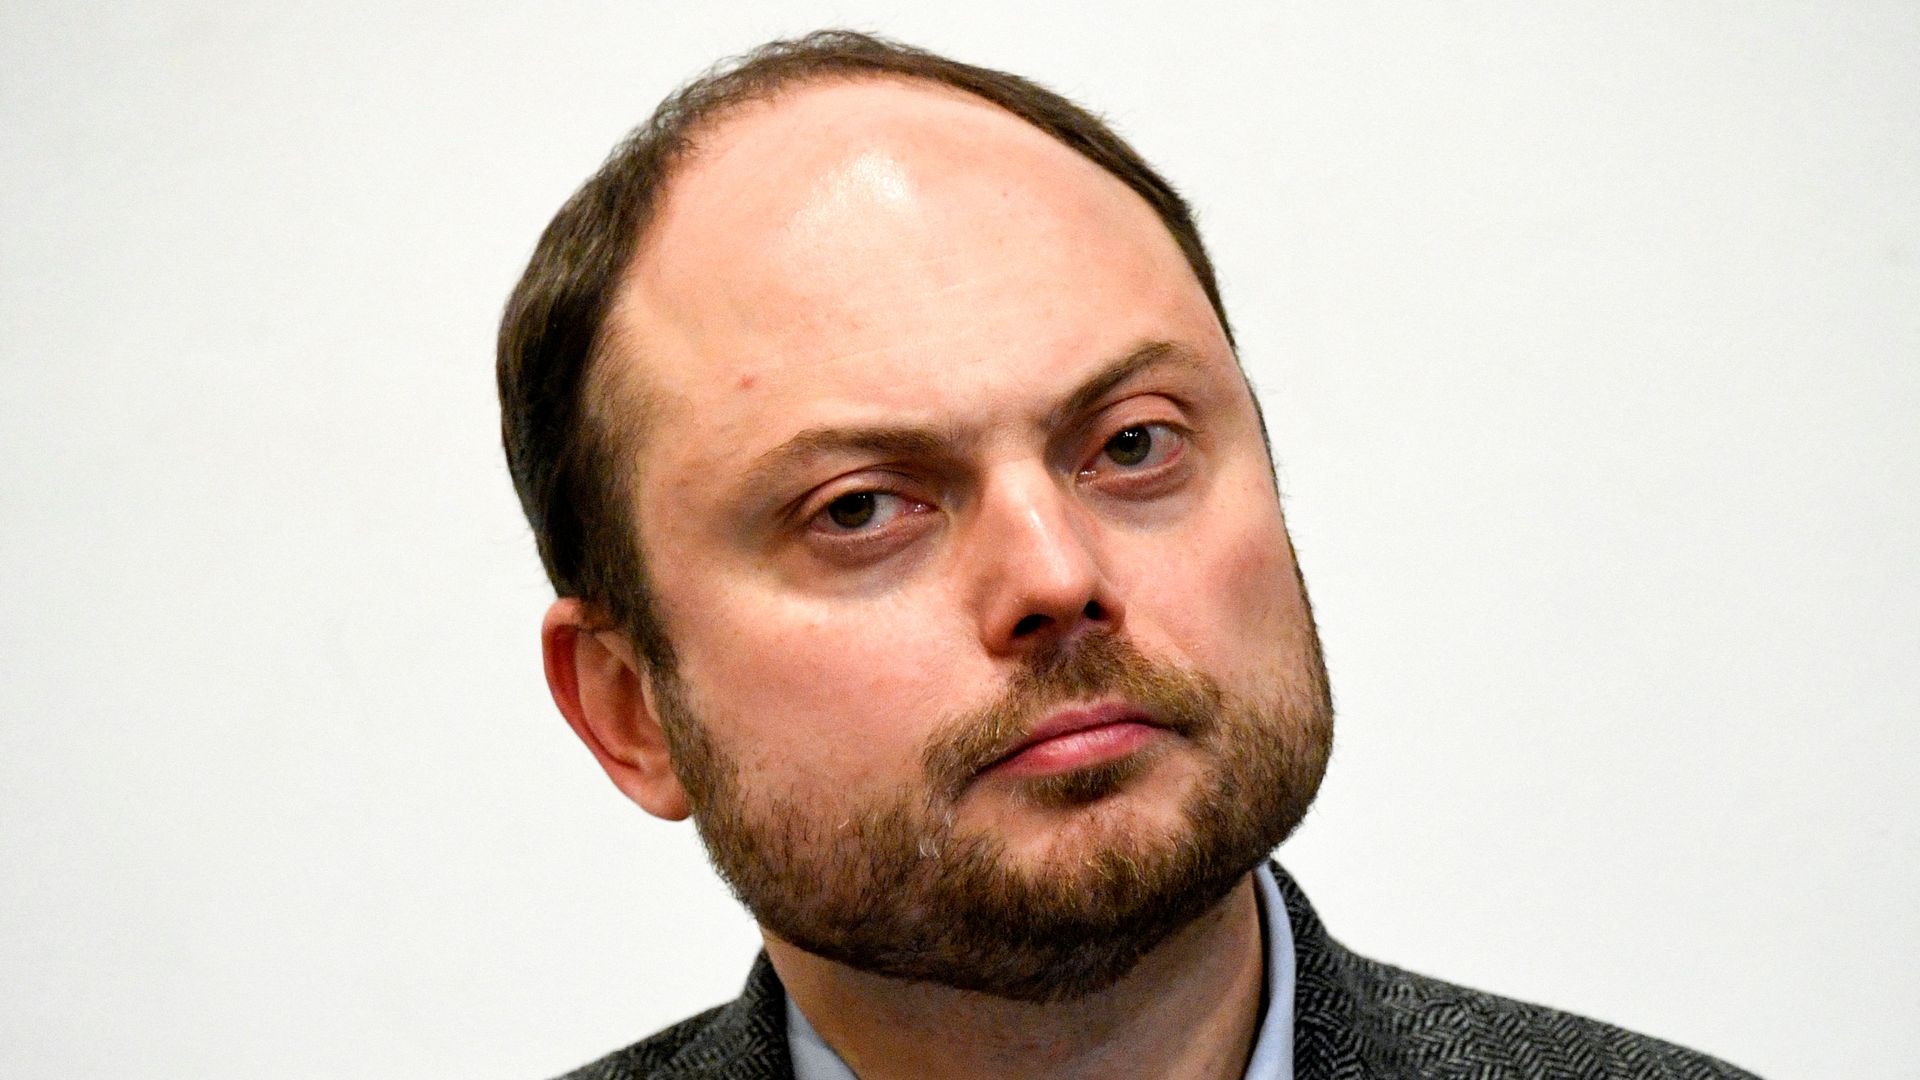 Russian journalist and activist Vladimir Kara-Murza attends a conference of Russia's leading rights group Memorial in Moscow on October 27, 2021. 